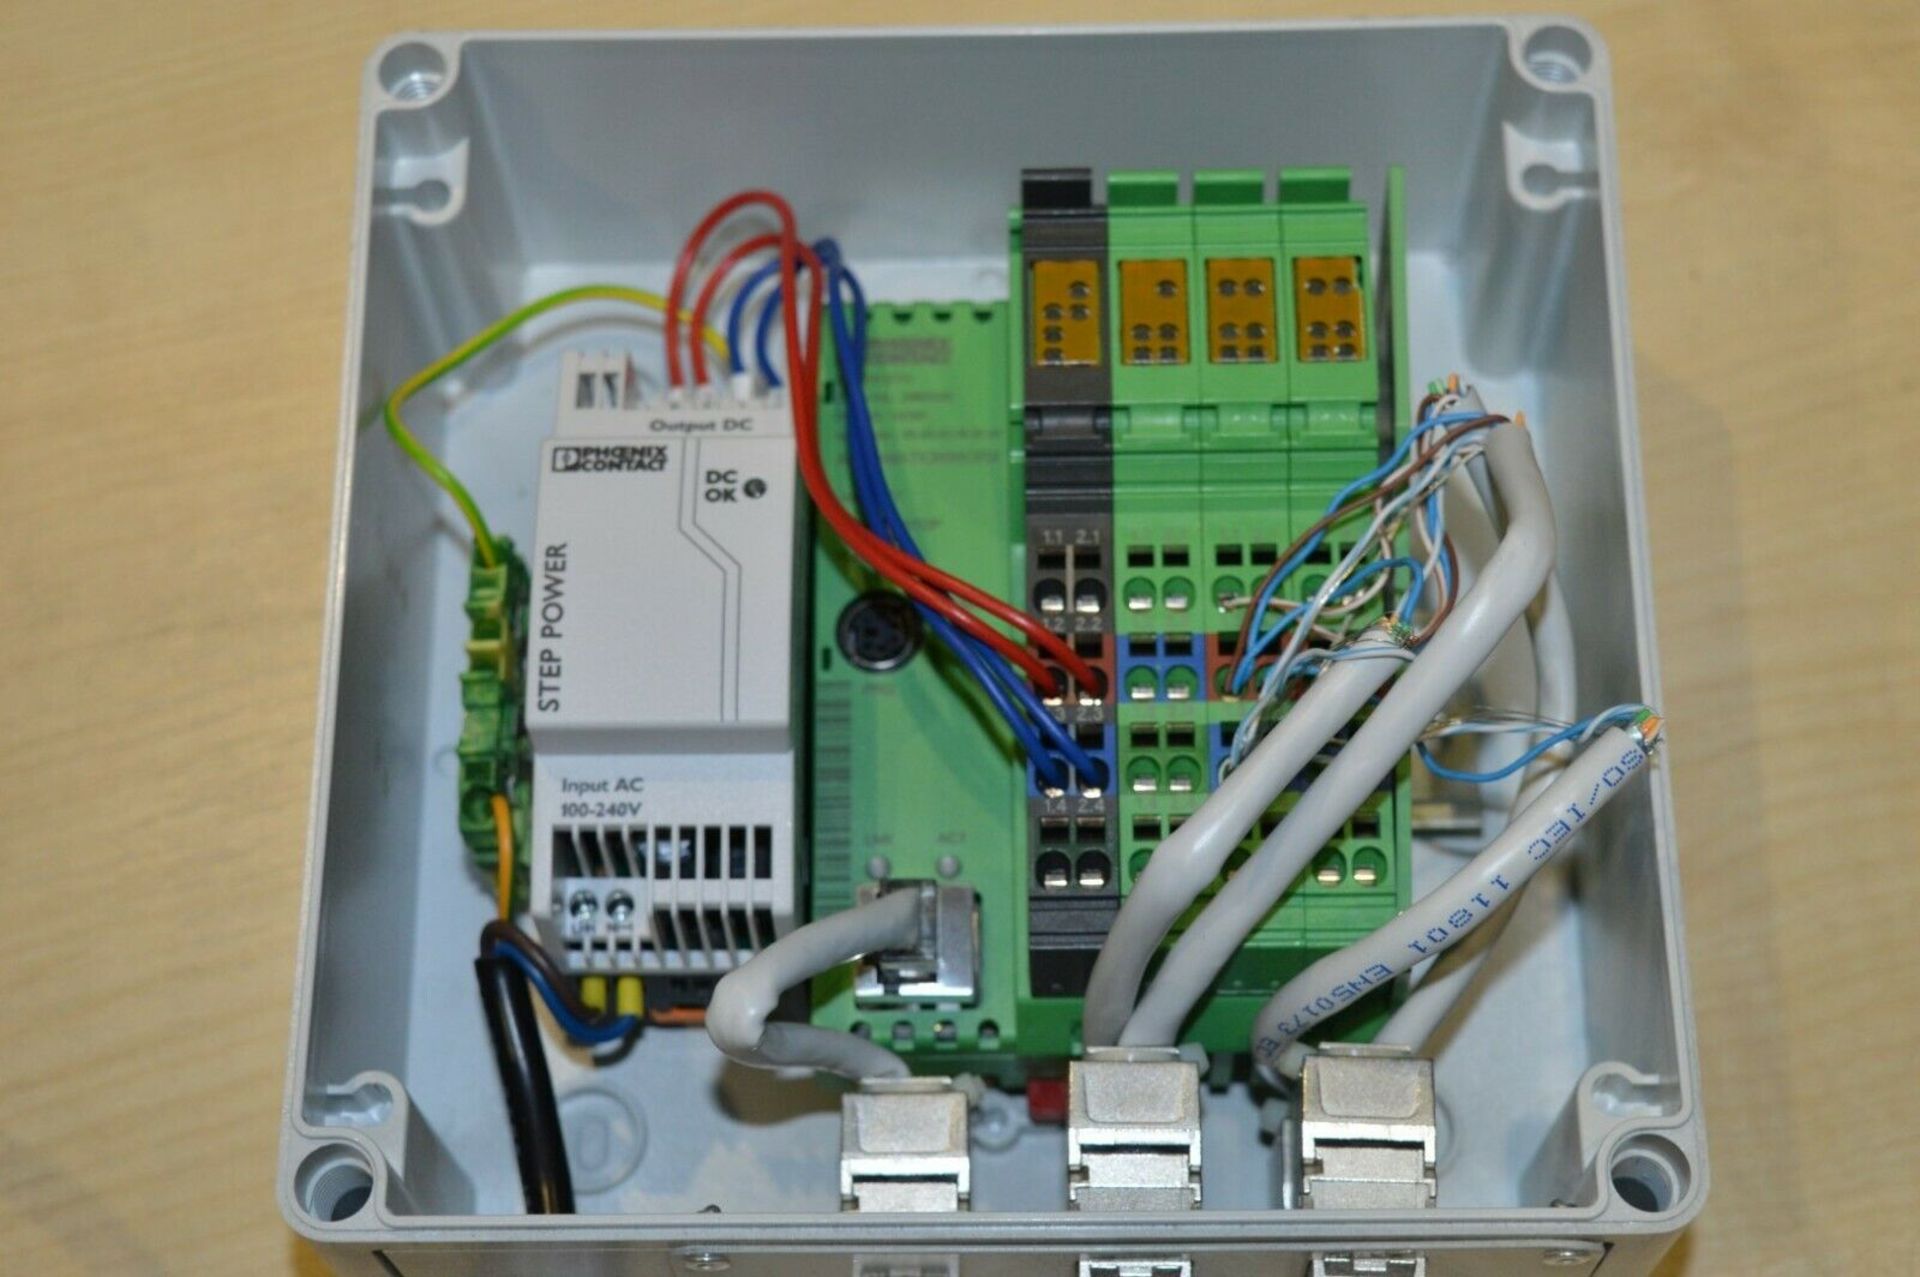 1 x Phoenix Contact Controller ILC 150 ETH 2985330 + Step Power and Enclosure - 240v UK Plug - WH1 - - Image 3 of 7